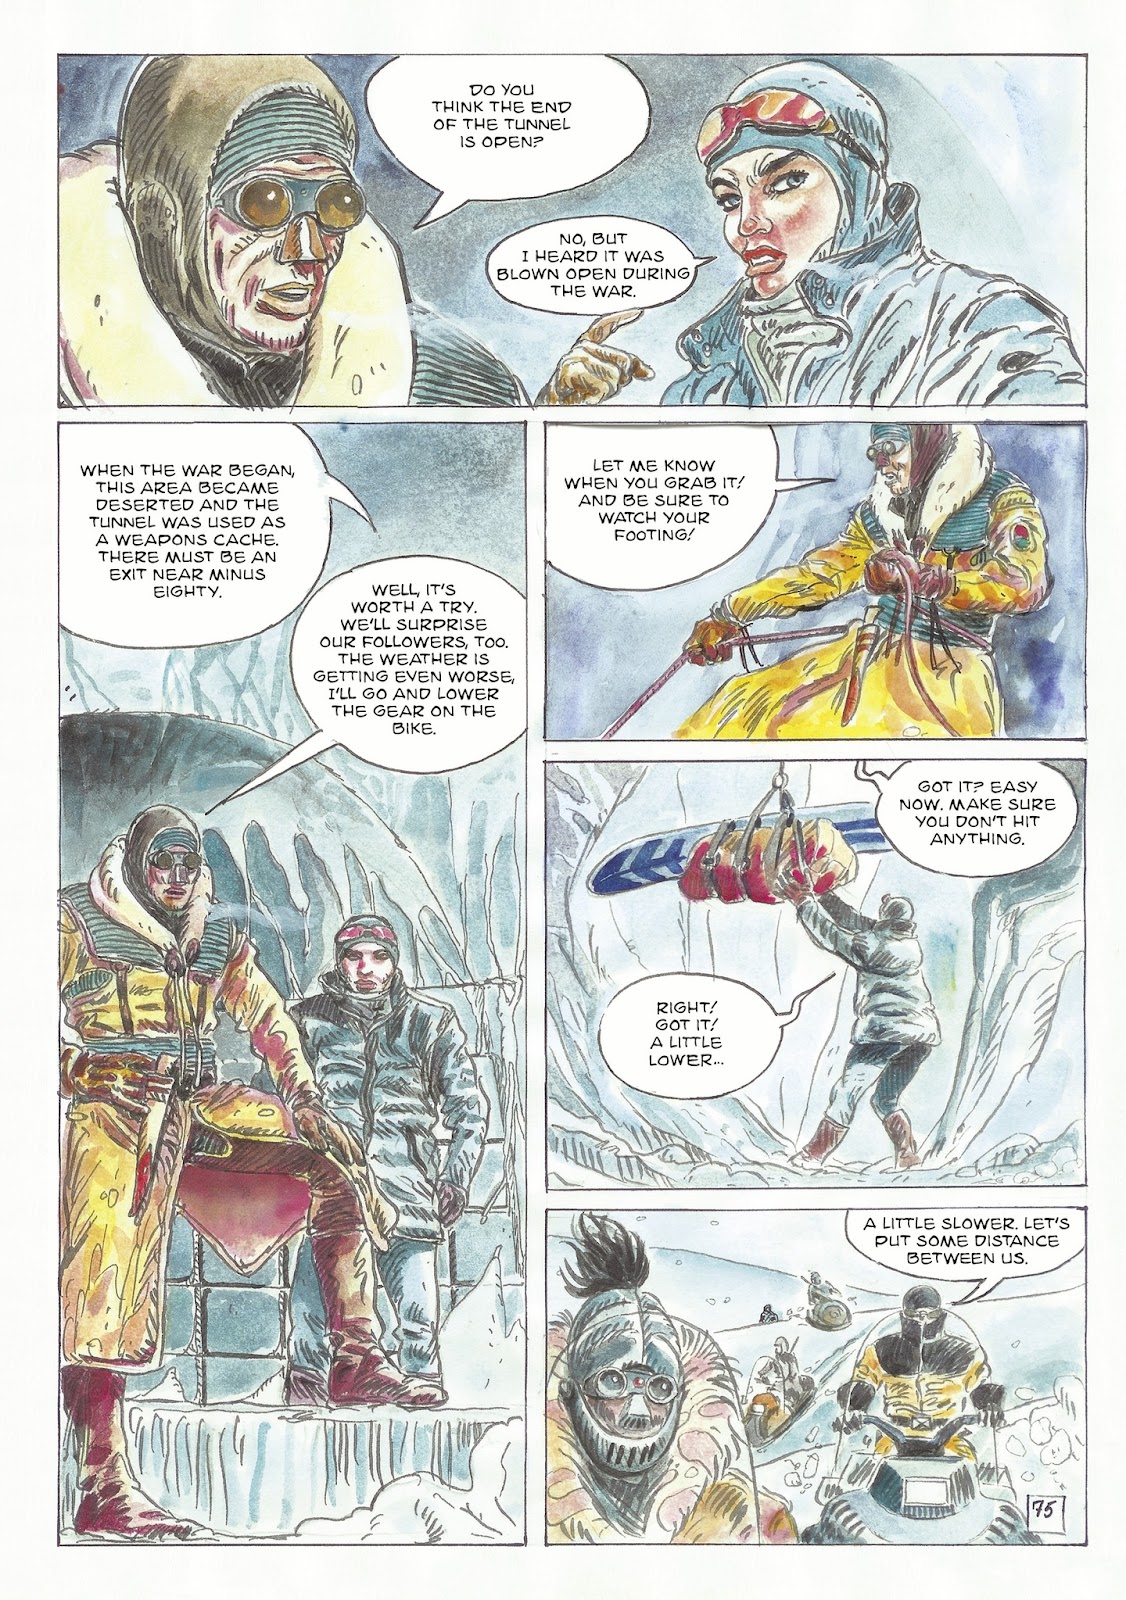 The Man With the Bear issue 2 - Page 21